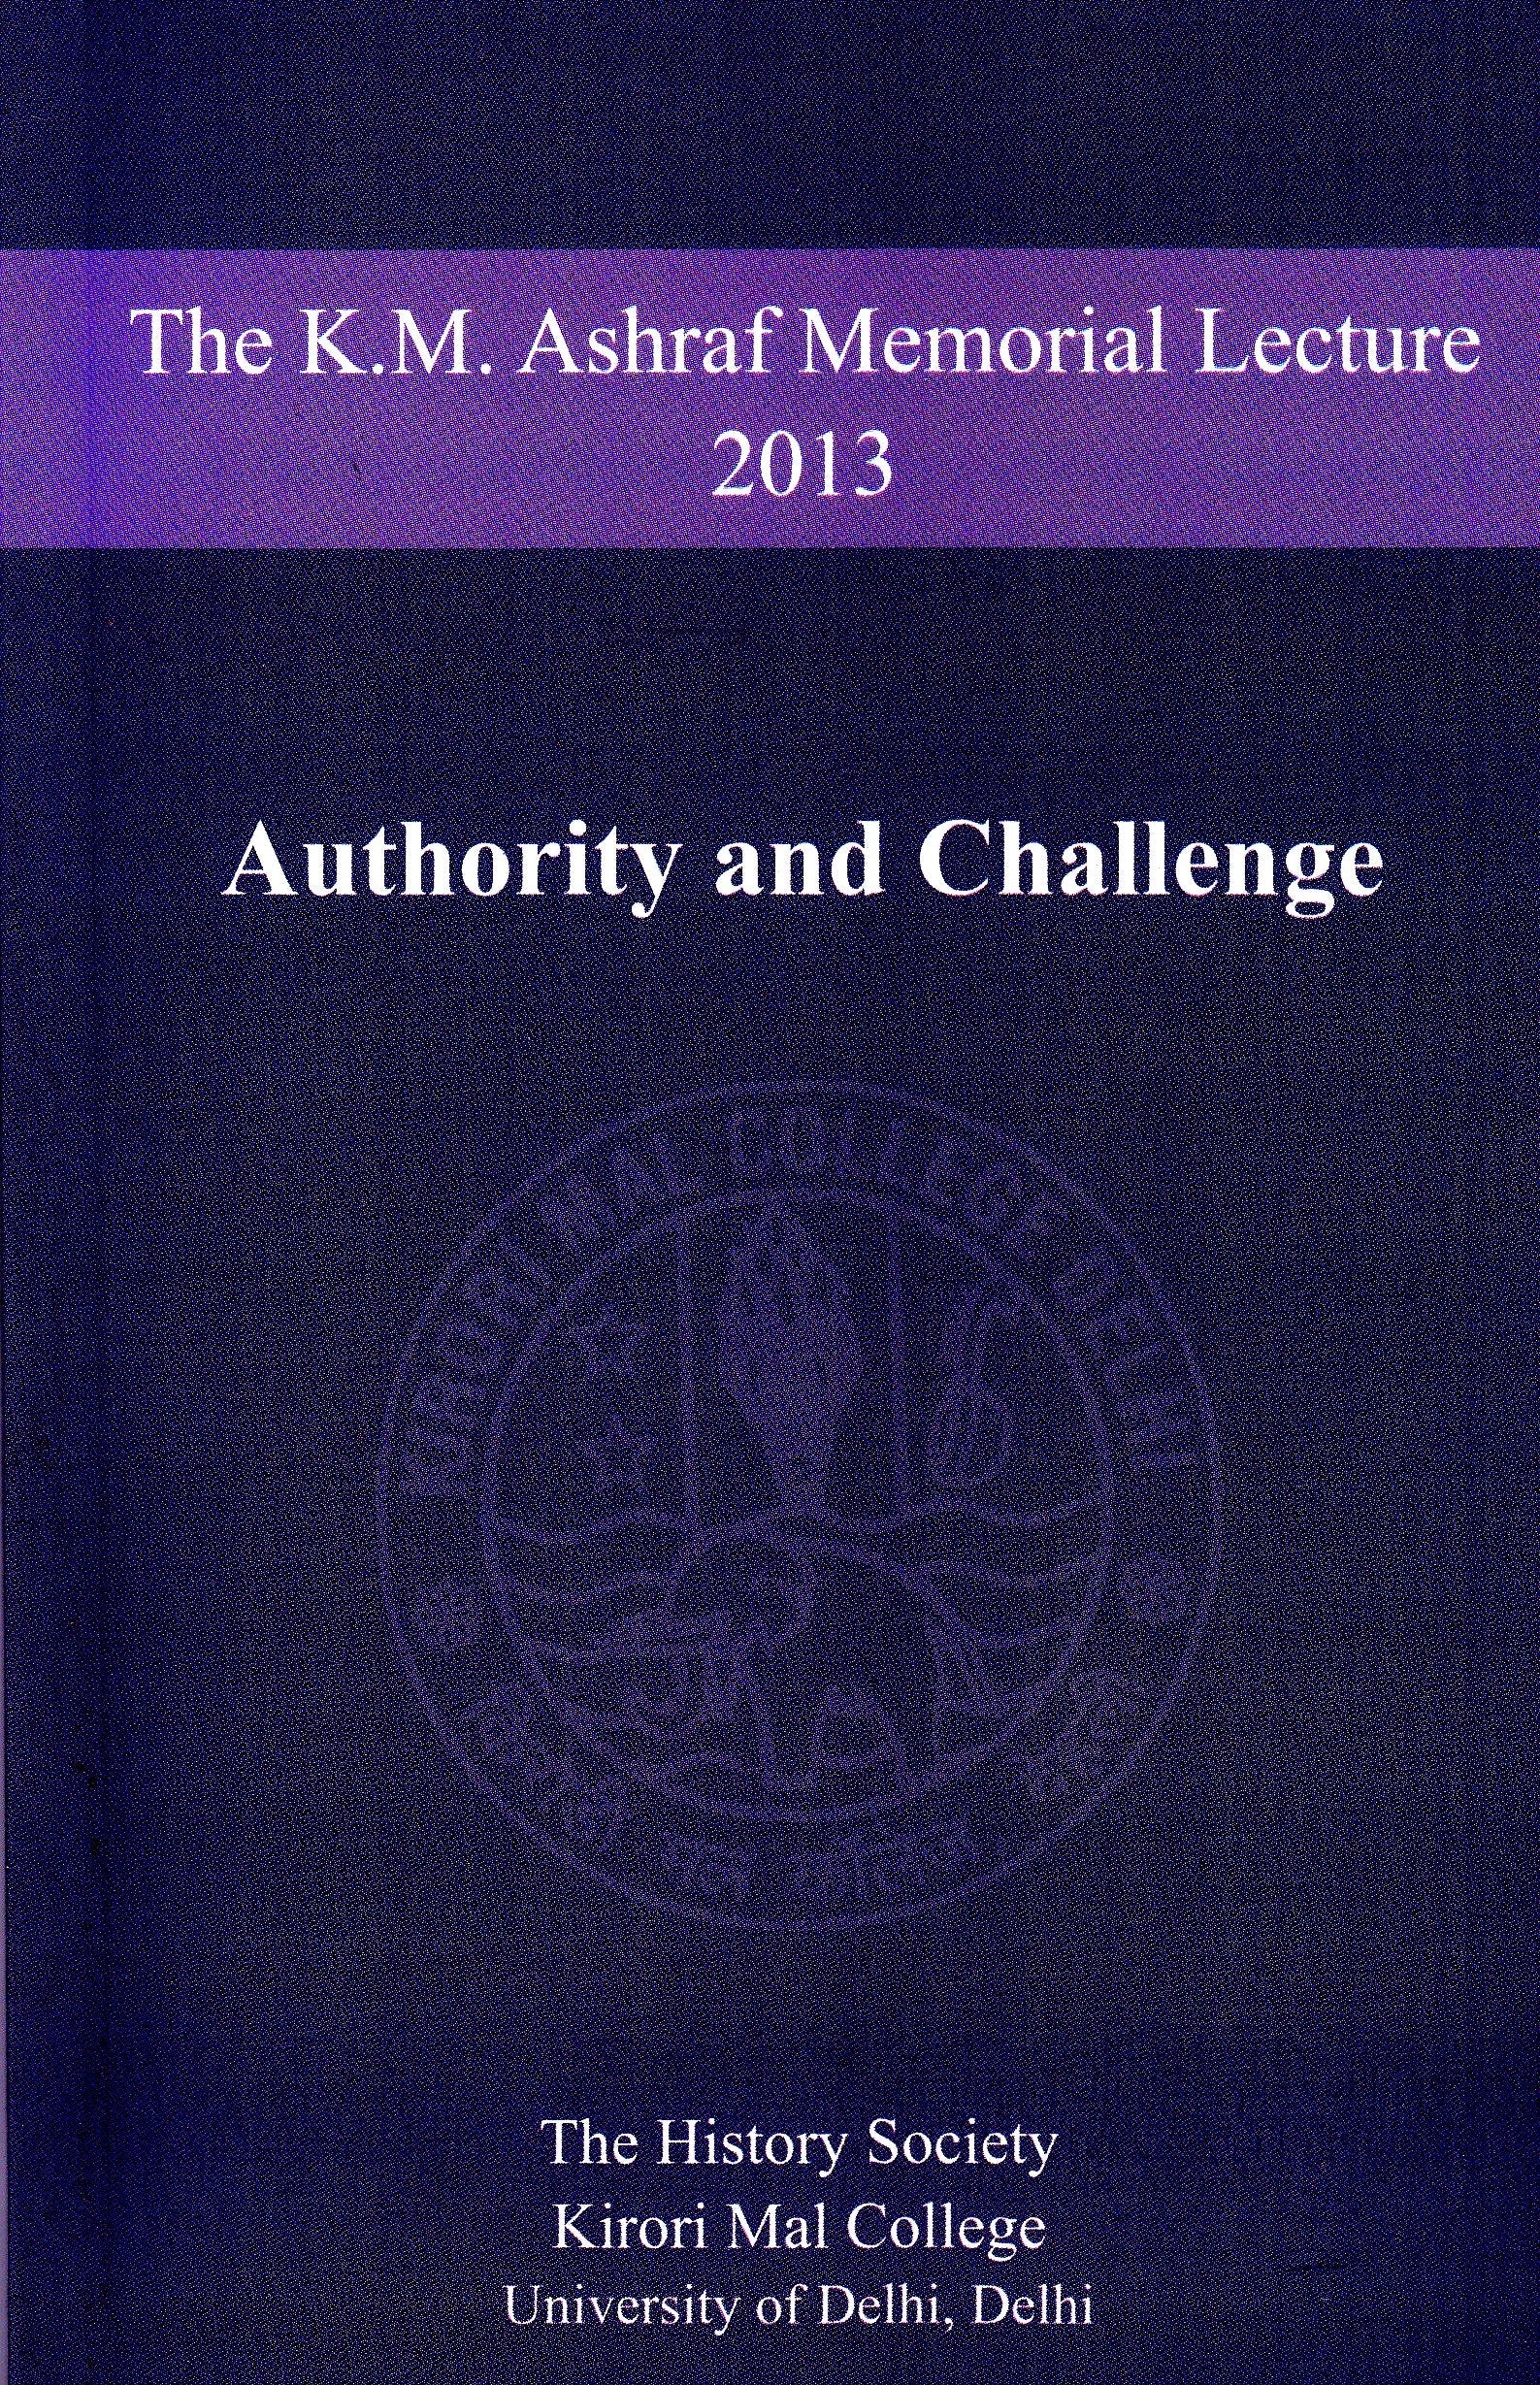 The K.M. Ashraf Memorial Lecture 2013: Authority and Challenge